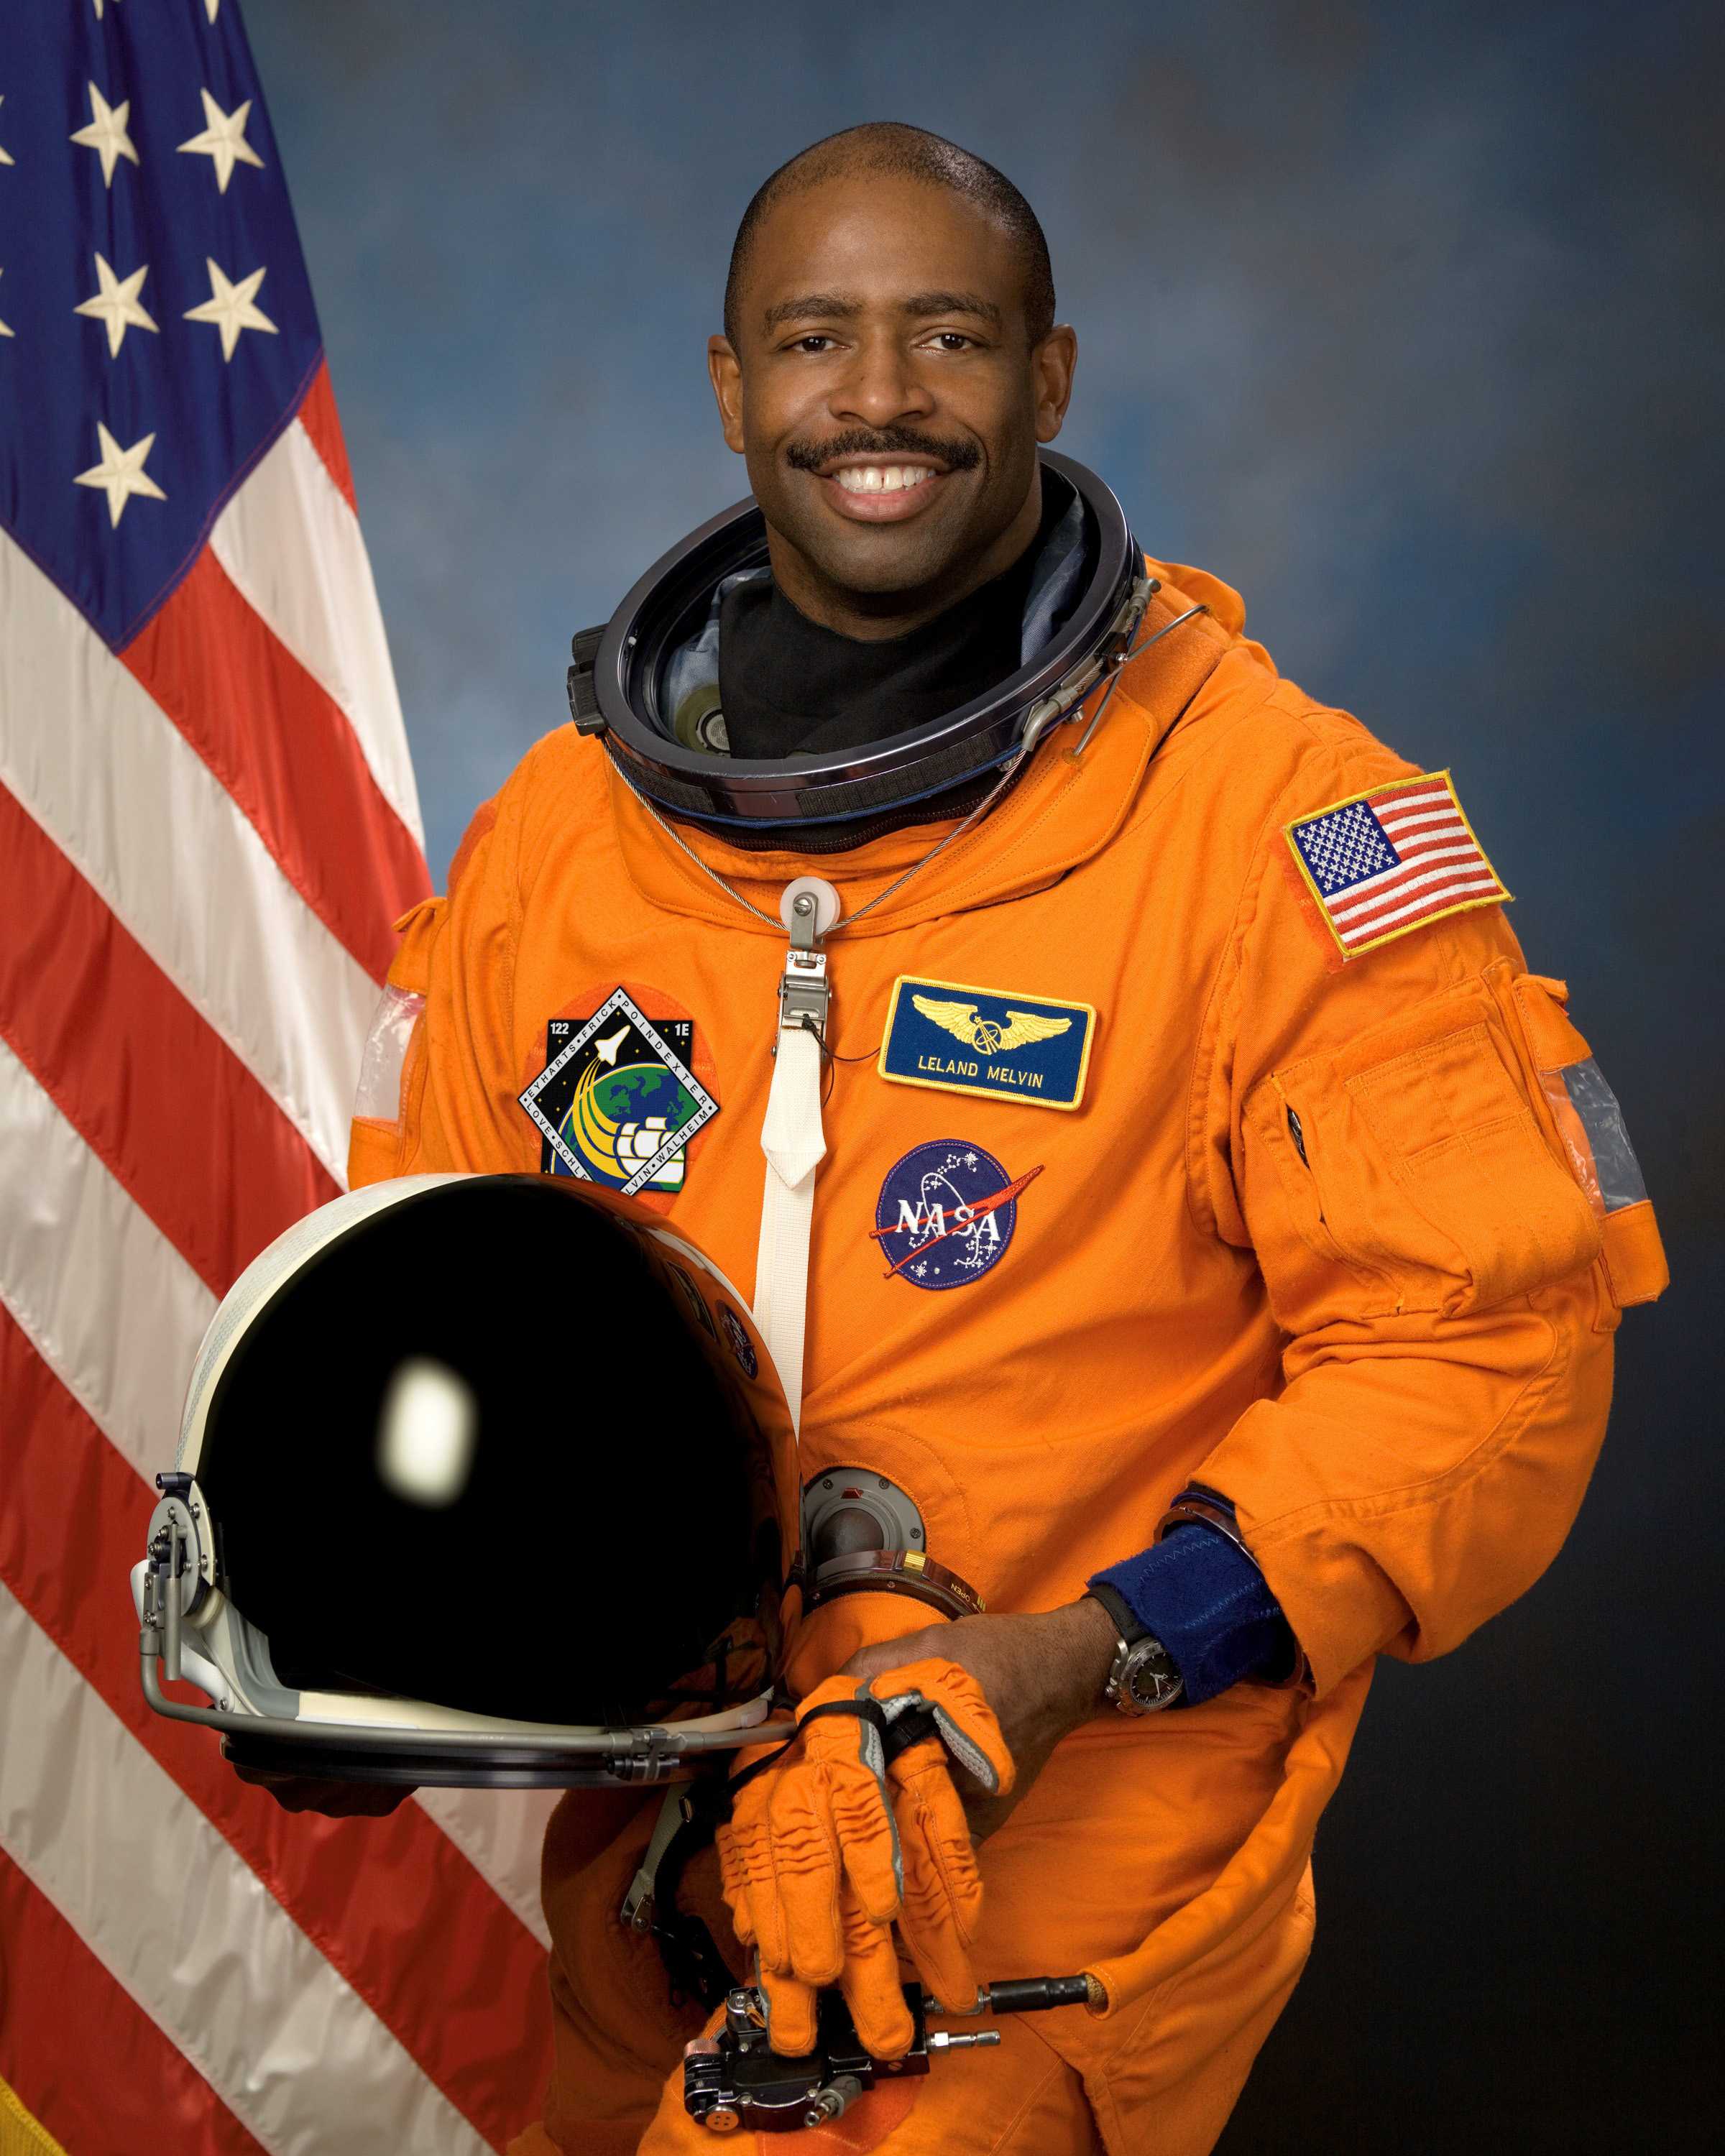 Melvin posed for his portrait while wearing an orange space suit and a helmet and gloves in his hands.